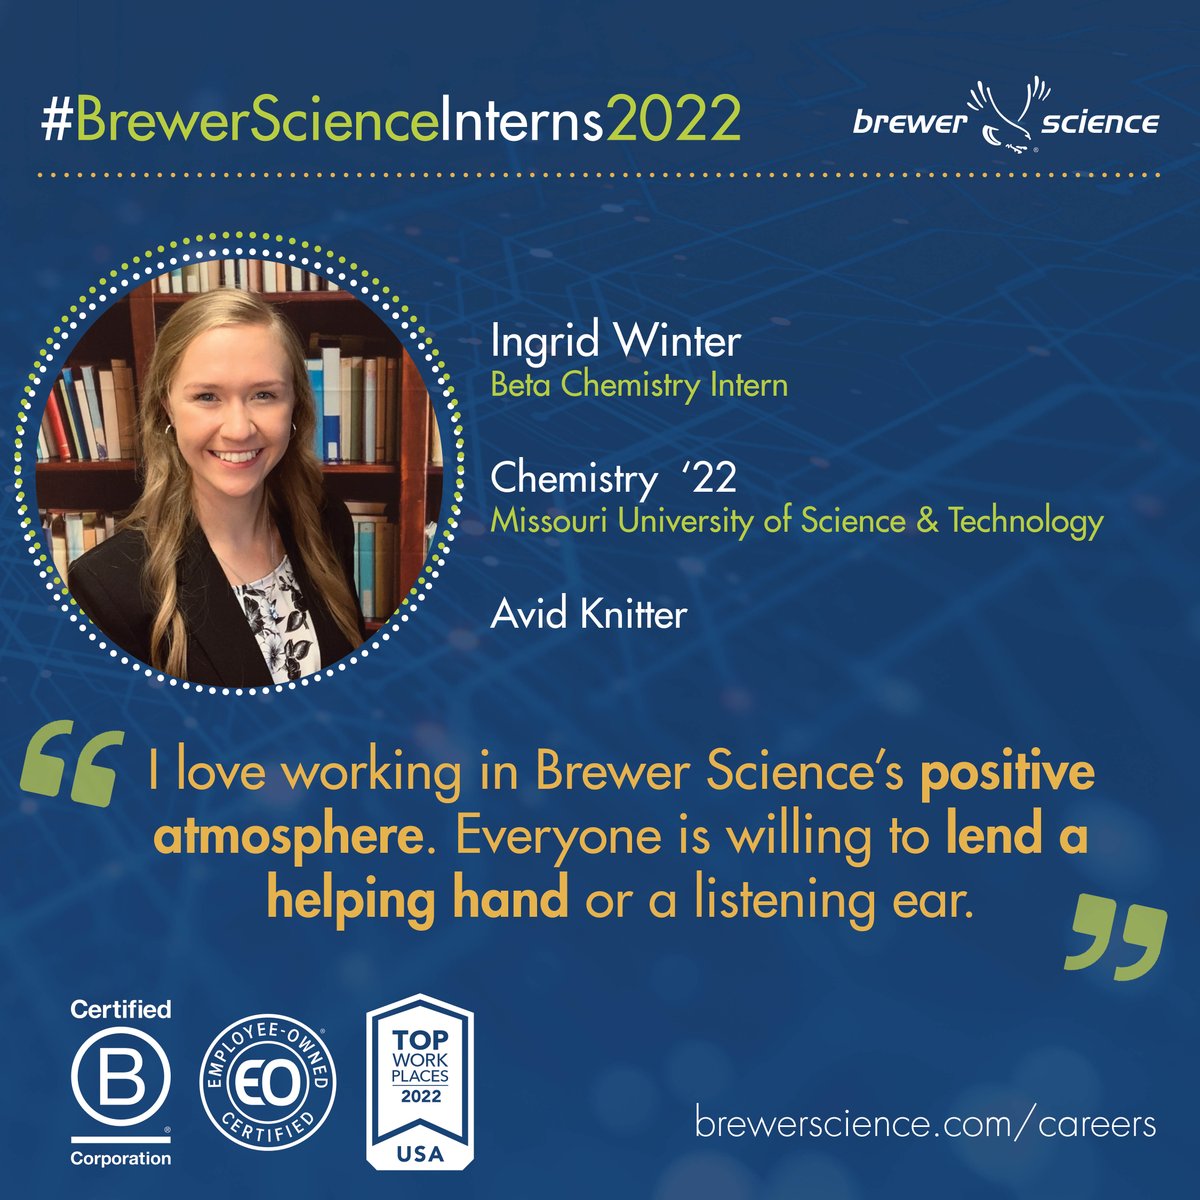 test Twitter Media - Ingrid Winter is a Beta Chemistry Intern, currently studying Chemistry at  .@MissouriSandT. Learn more about internships & career opportunities at Brewer Science: https://t.co/m1zagYMILm https://t.co/KIoPg1fxlb